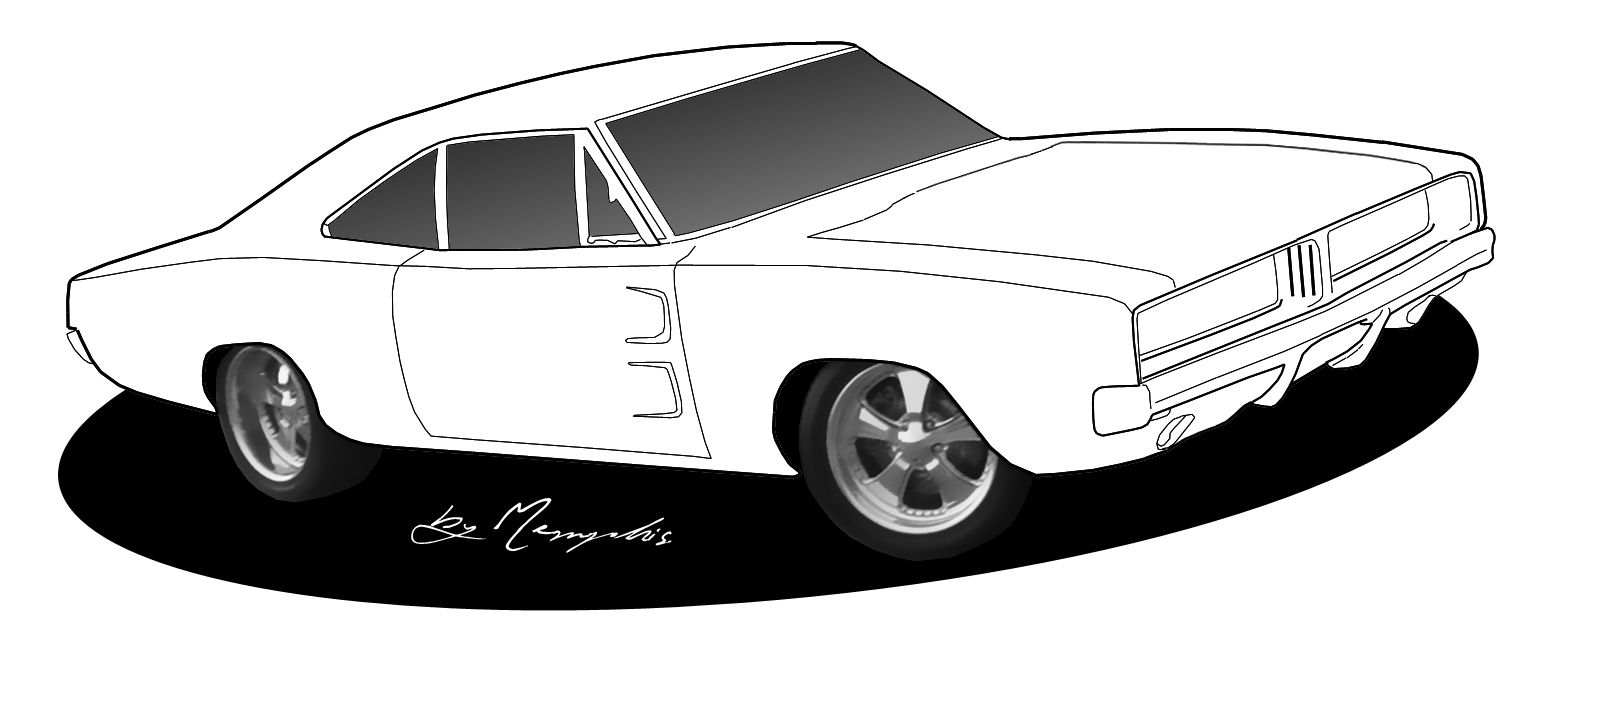 Free Black And White Car Drawings, Download Free Clip Art, Free Clip Art on Clipart Library